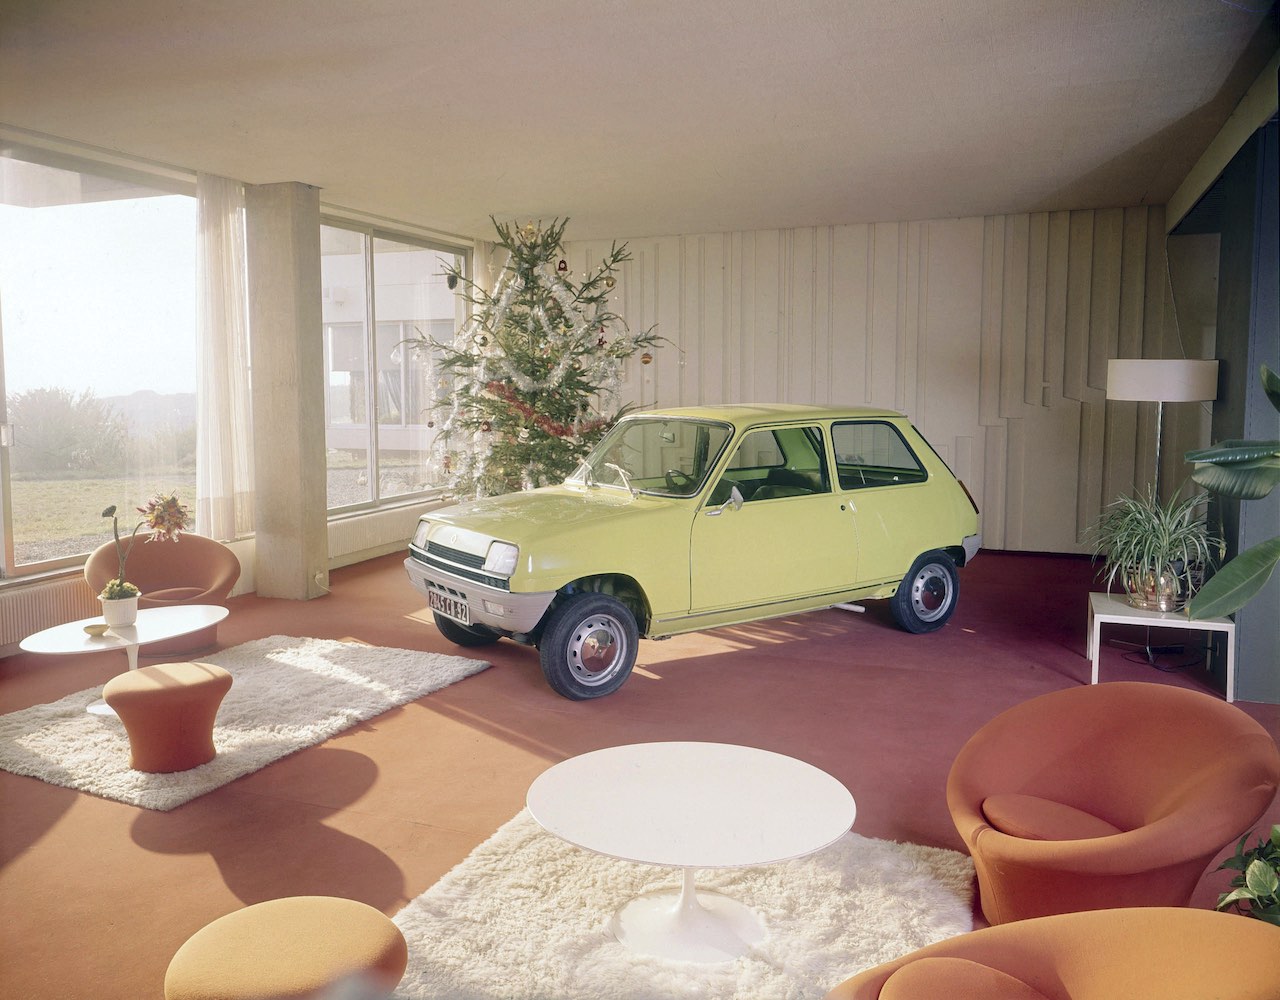 The story of the Renault 5 Prototype